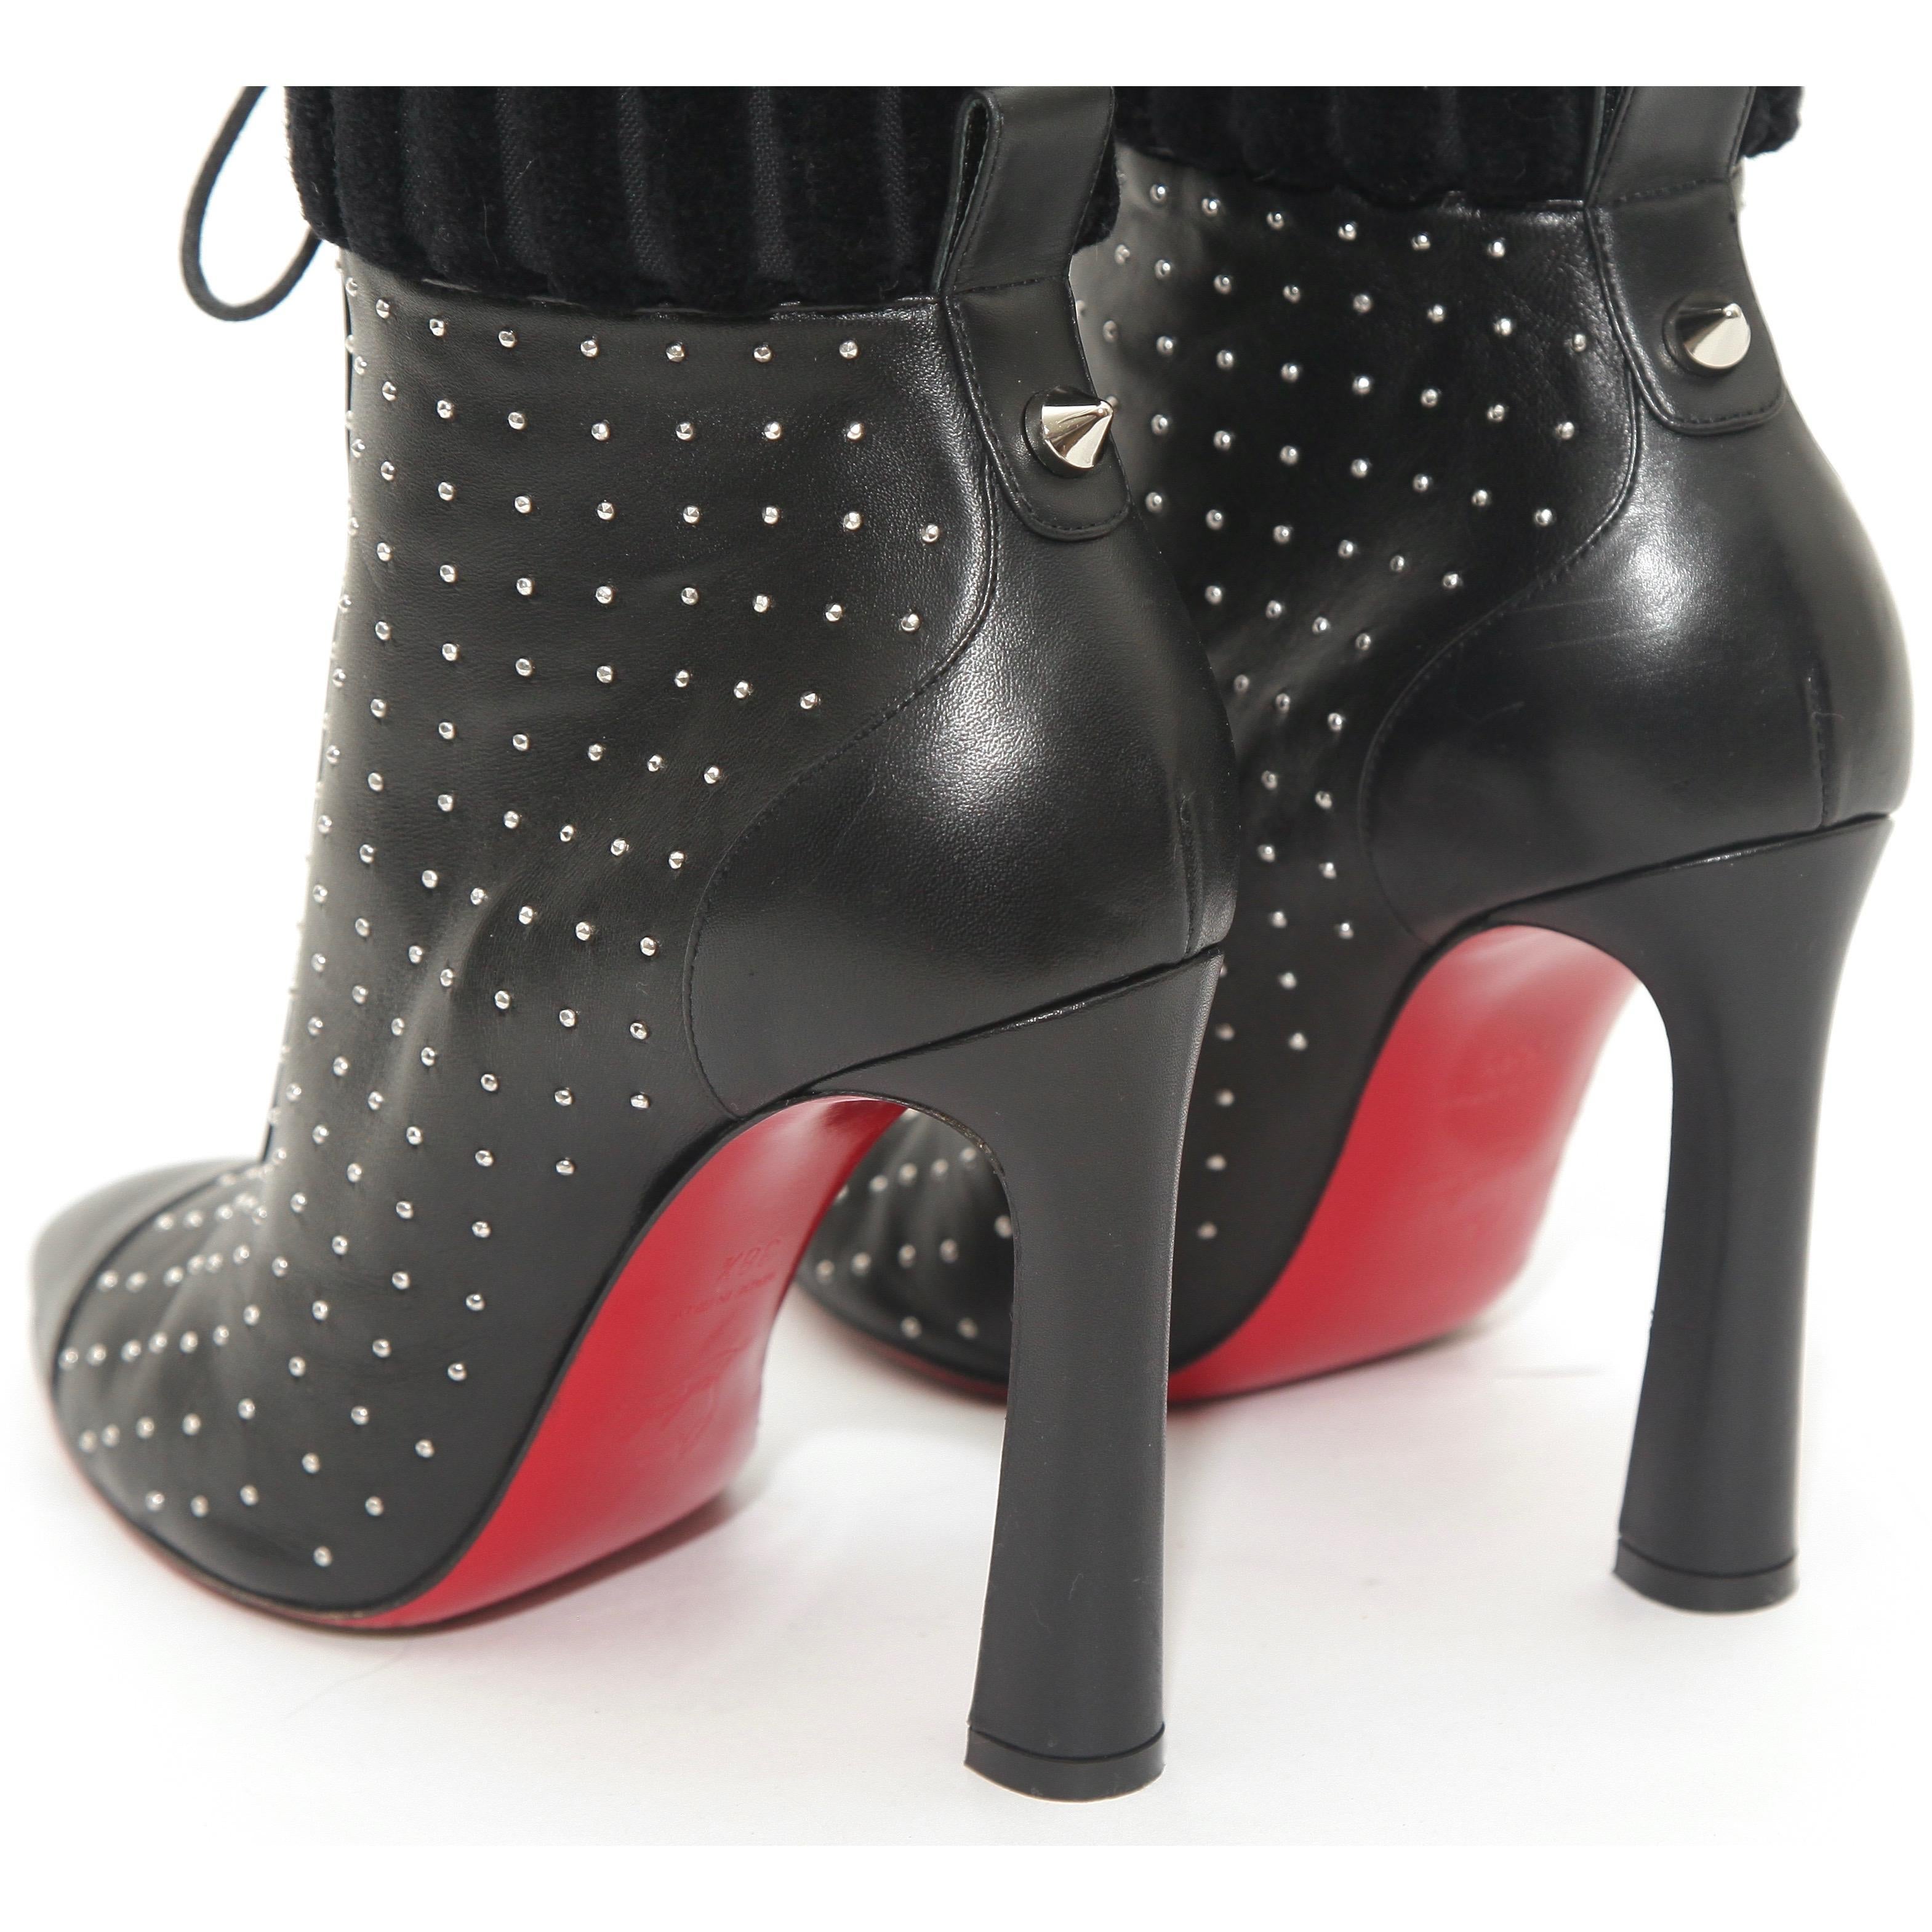 CHRISTIAN LOUBOUTIN Black Leather Ankle Boot Silver Studs Lace Up Toe Sz 38.5 For Sale 1